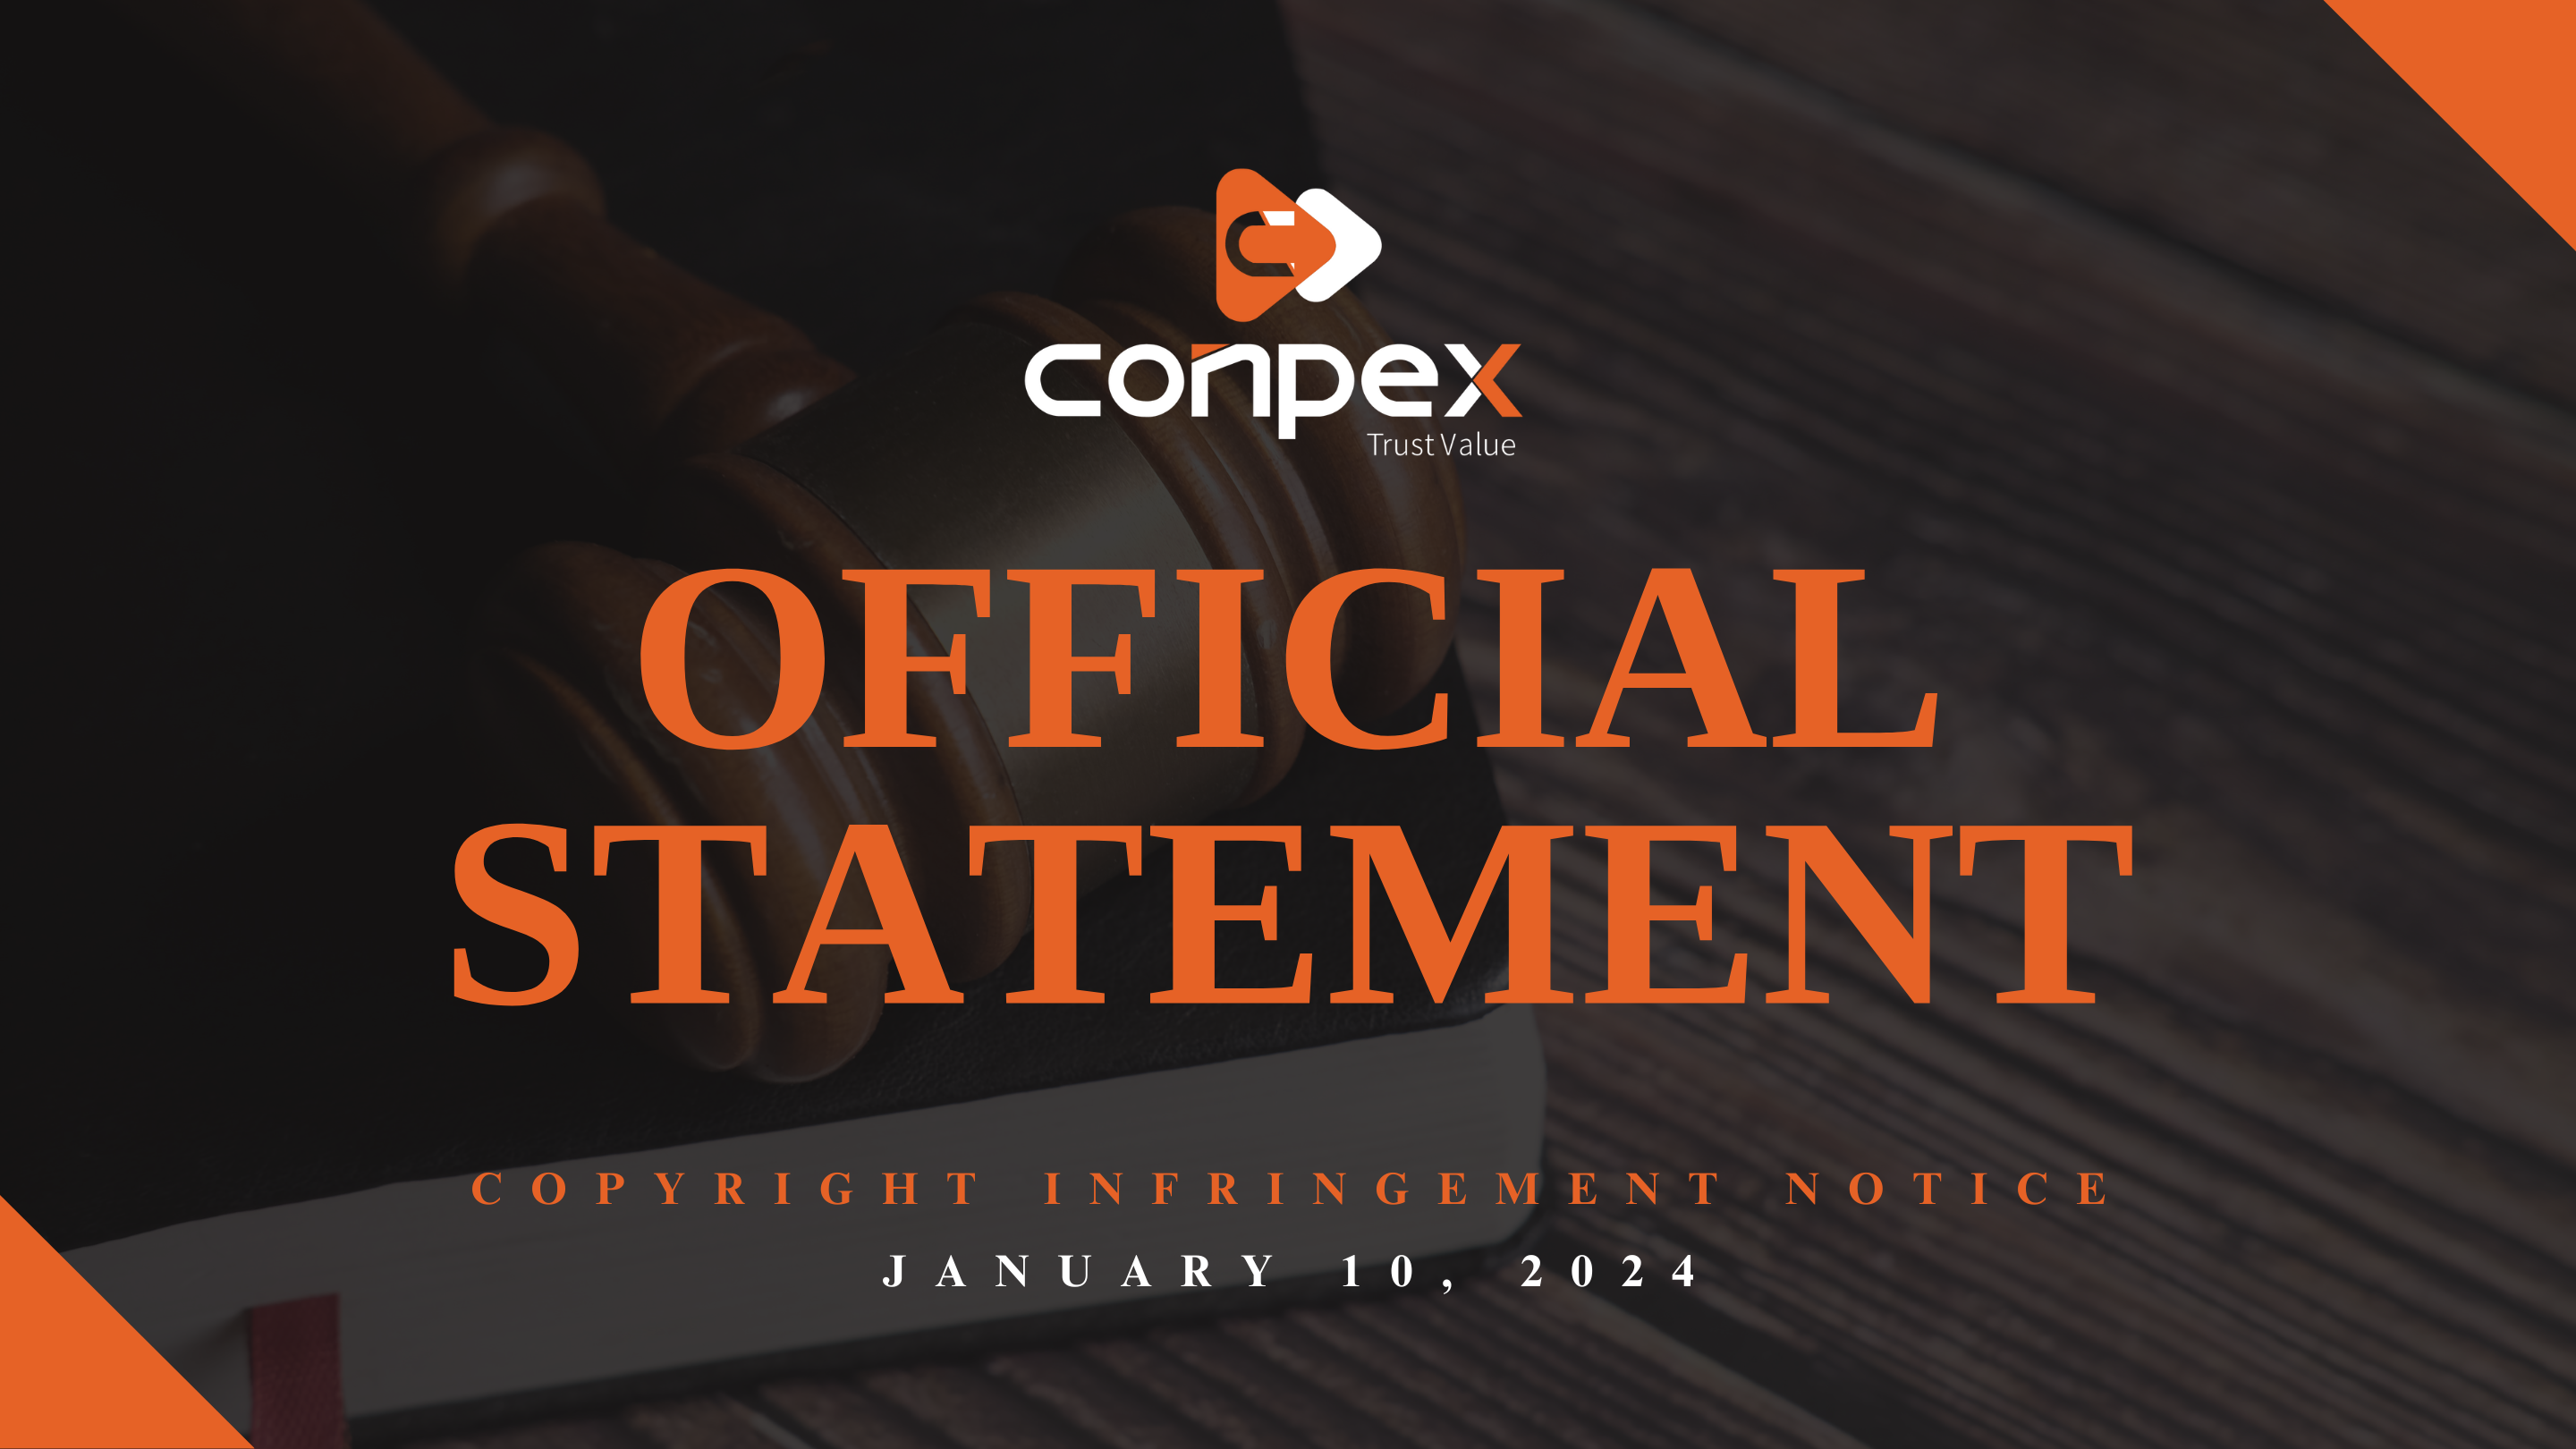 Statement on Clearing the Market and Combating Illegal Activities that Infringe on the CONPEX Brand